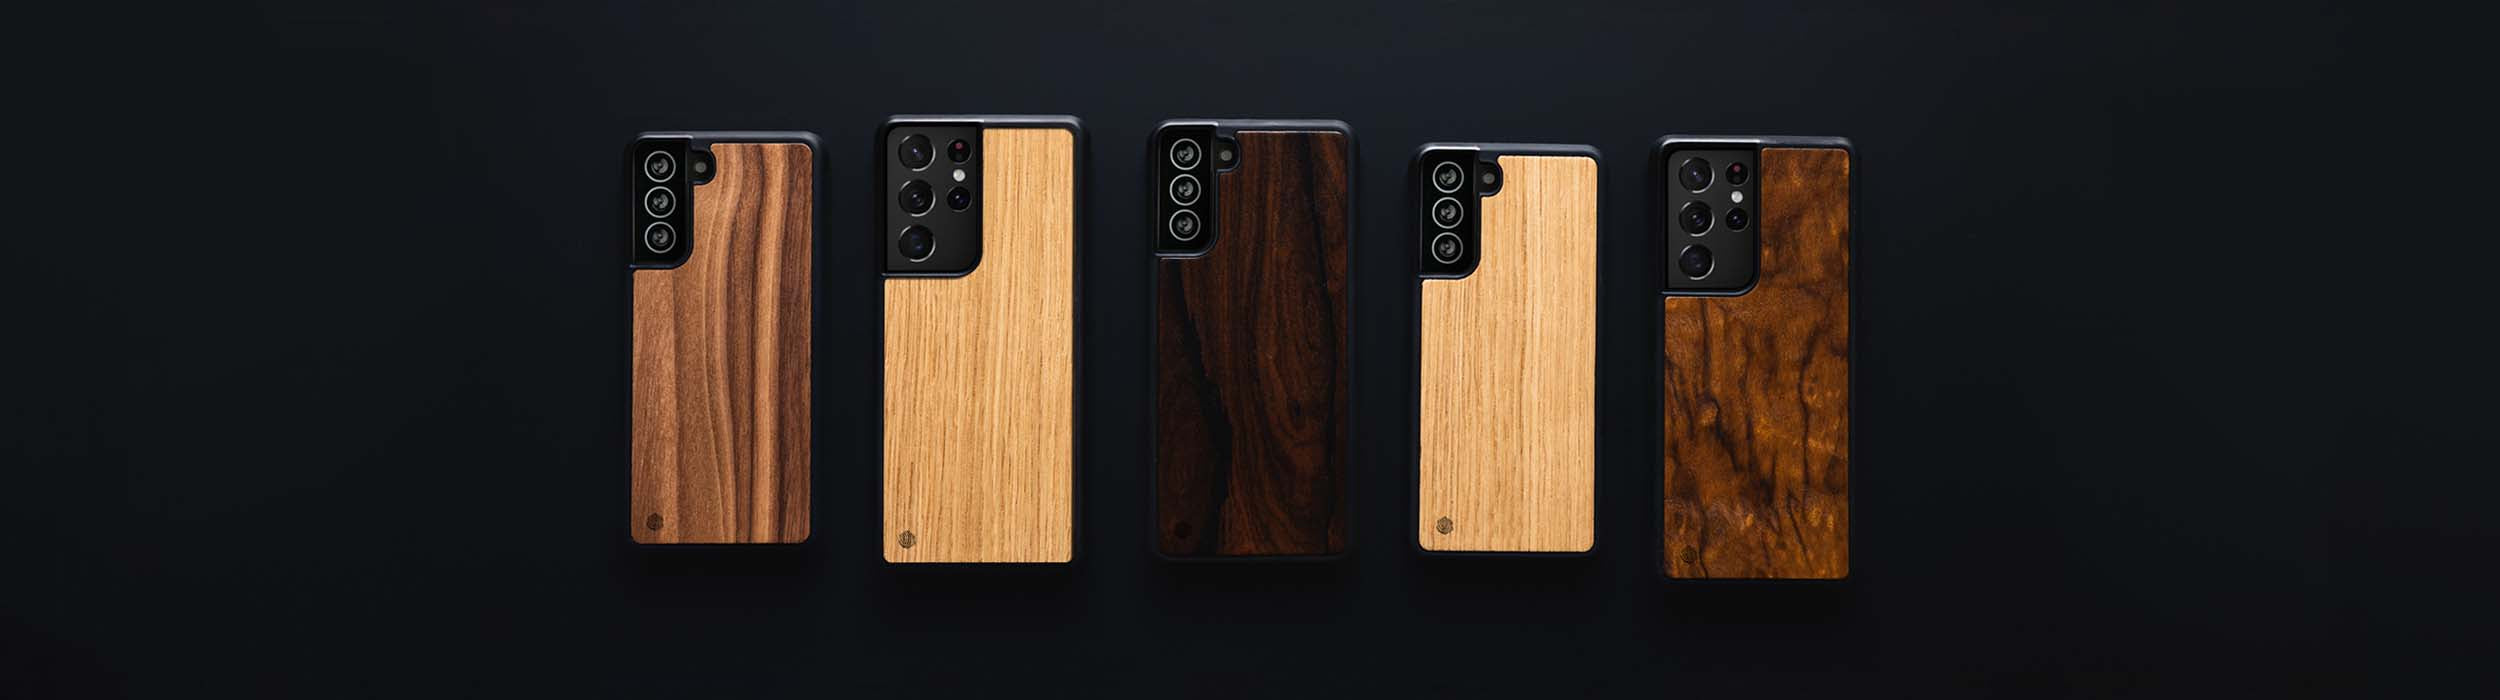 Samsung Wooden Phone Cases